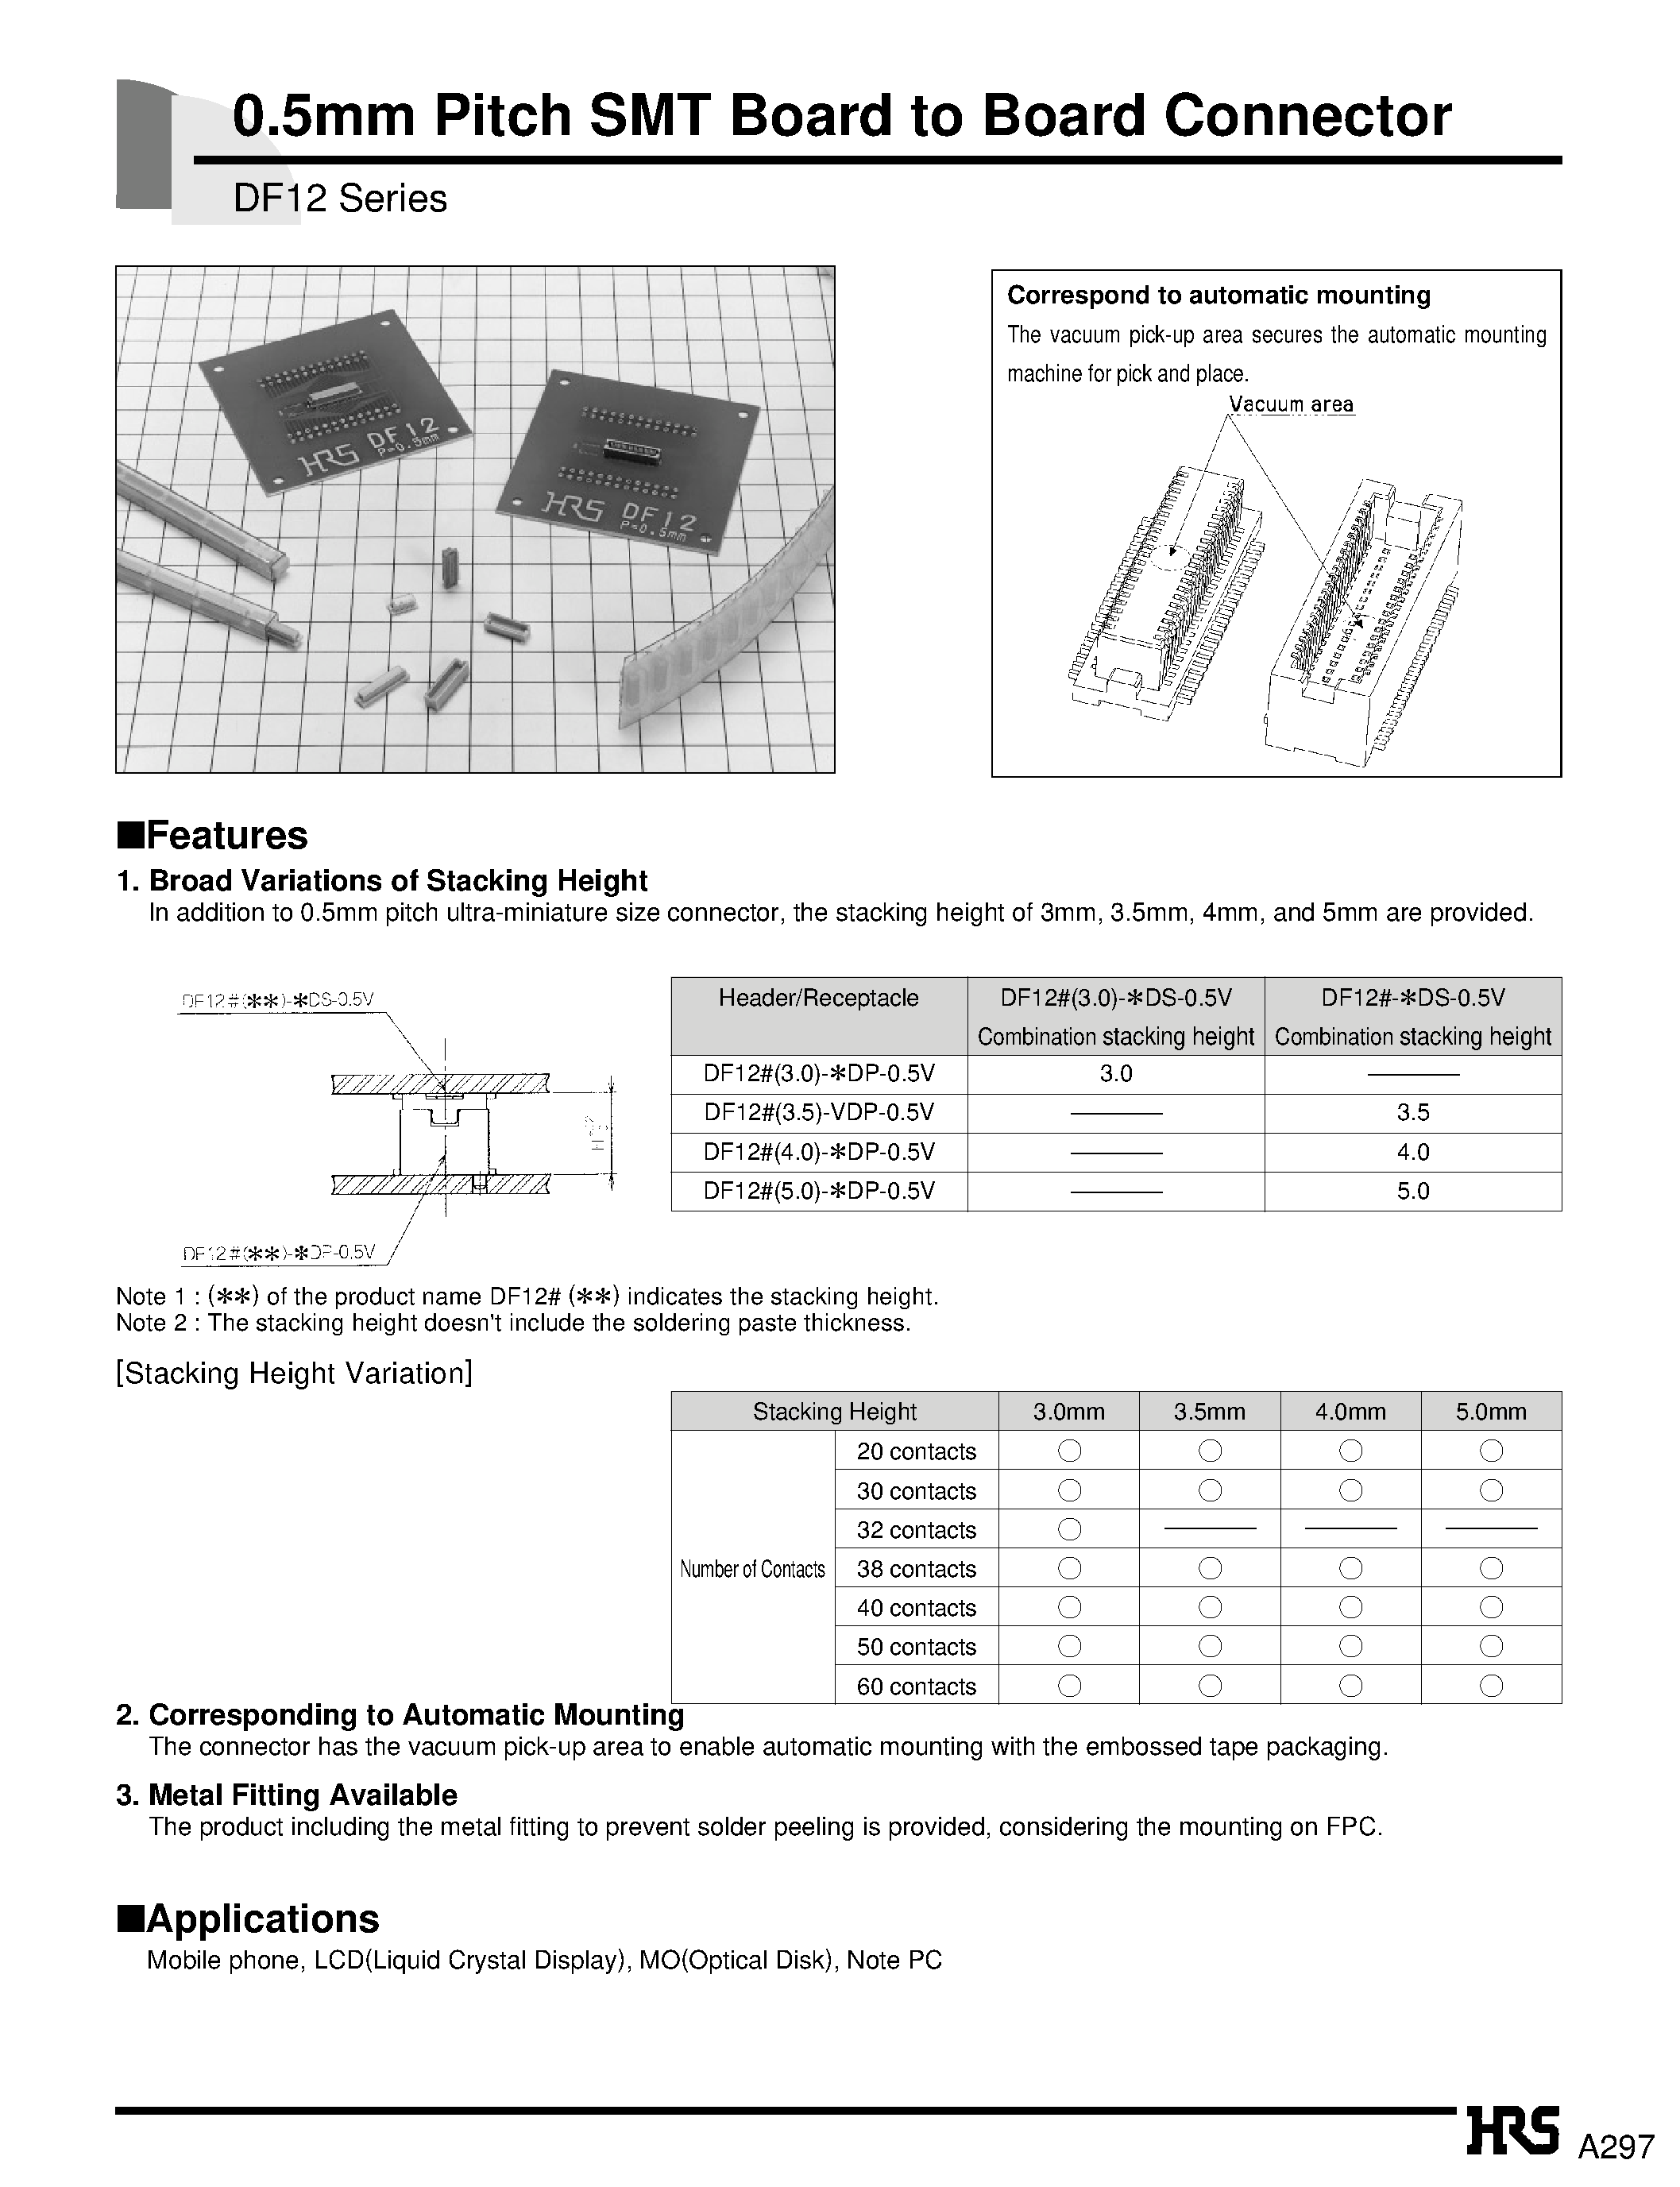 Datasheet DF12C-50DP-0.5V - 0.5mm Pitch SMT Board to Board Connector page 1